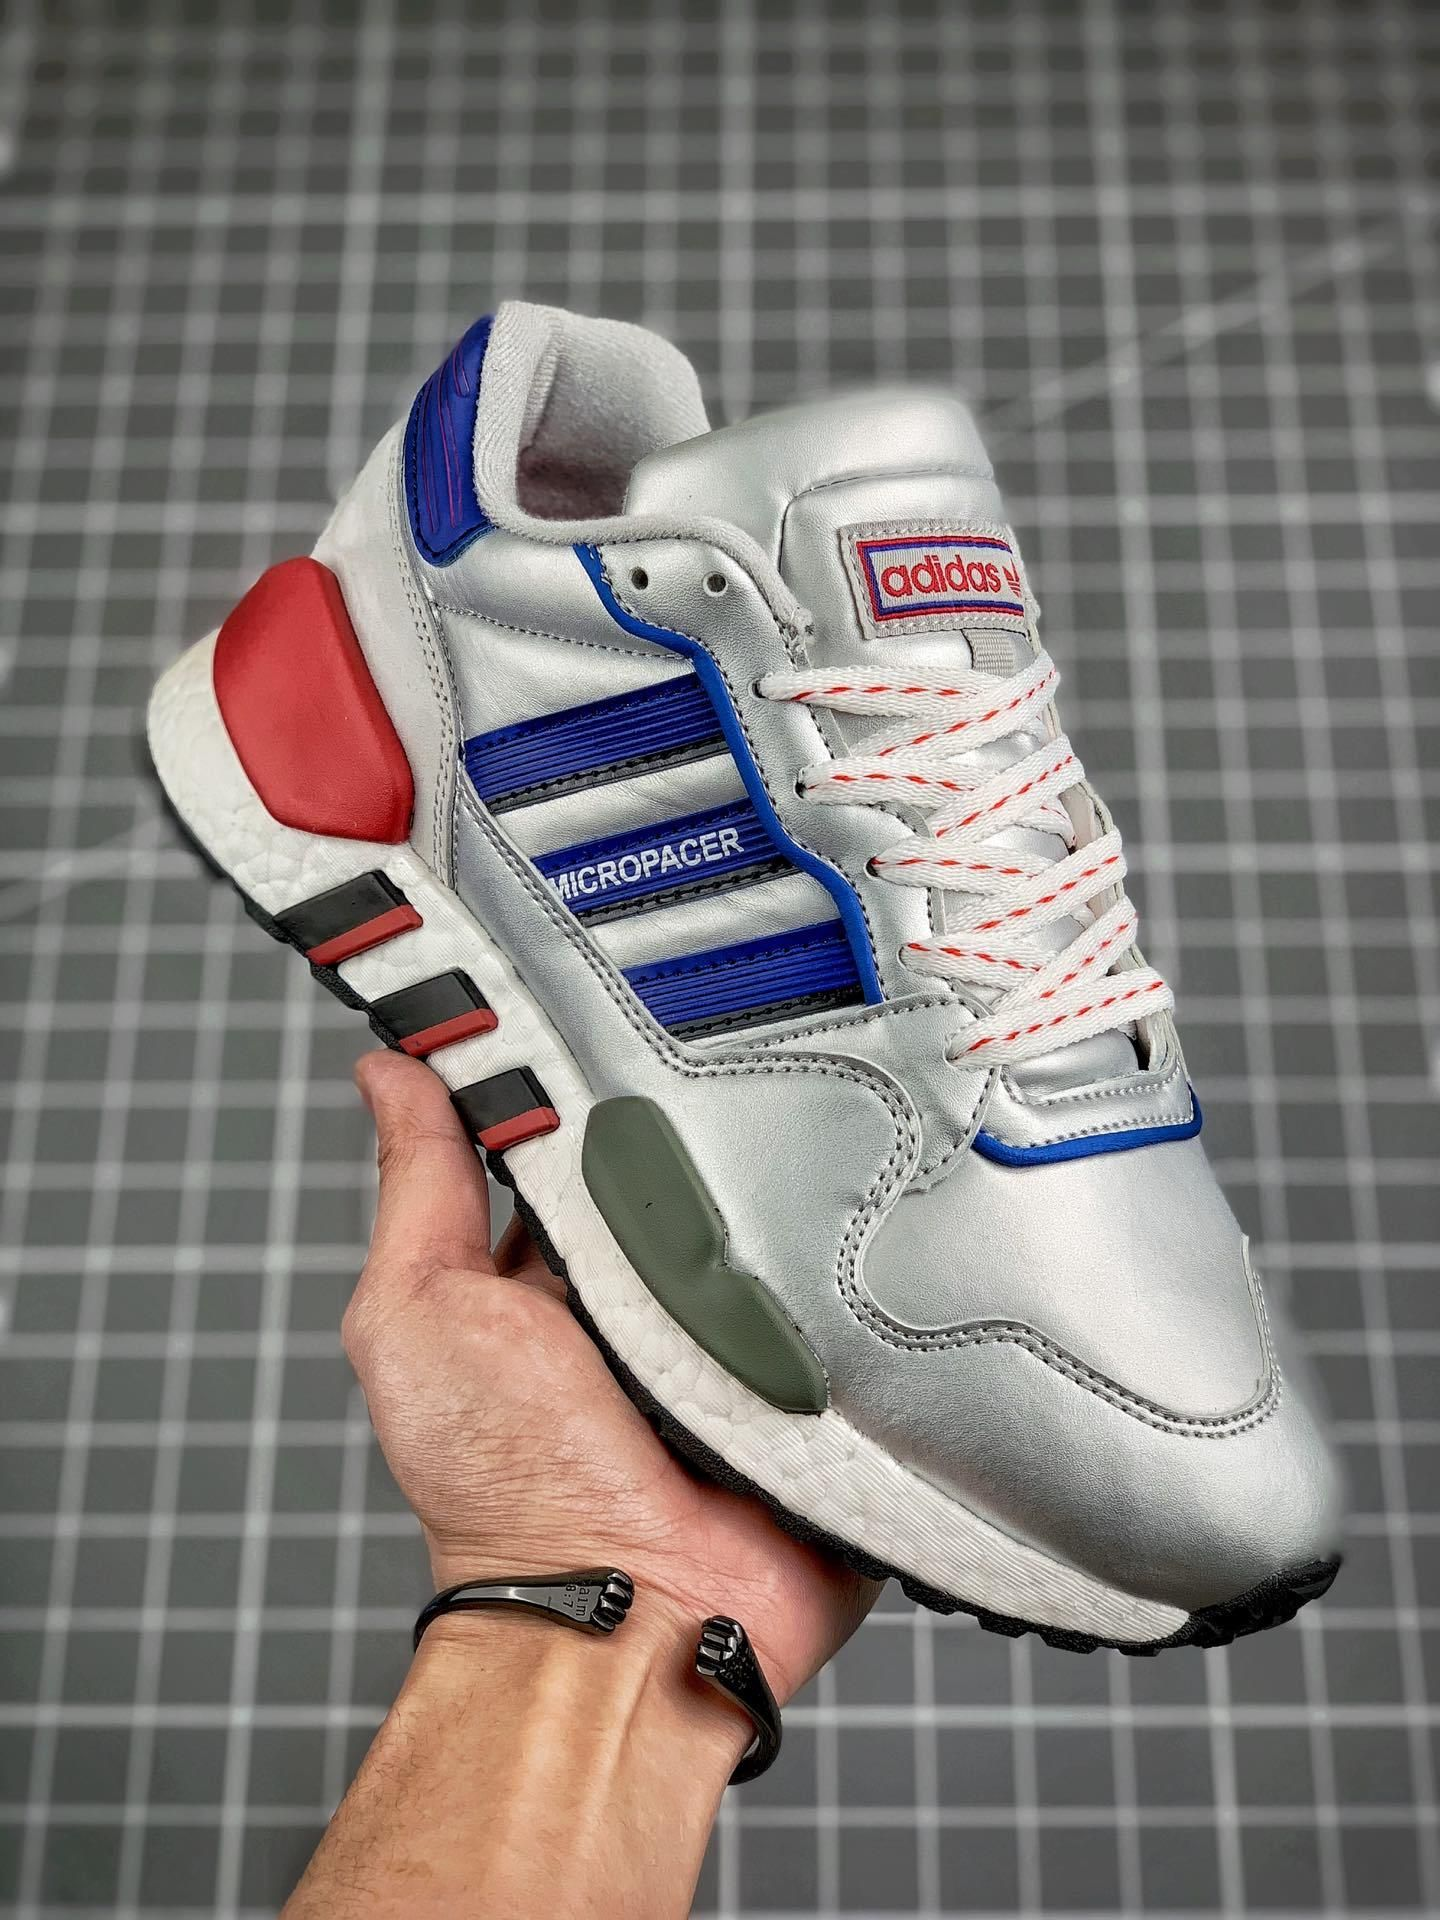 On Sale: adidas ZX 930 Micropacer Boost "Silver" — Sneaker Shouts